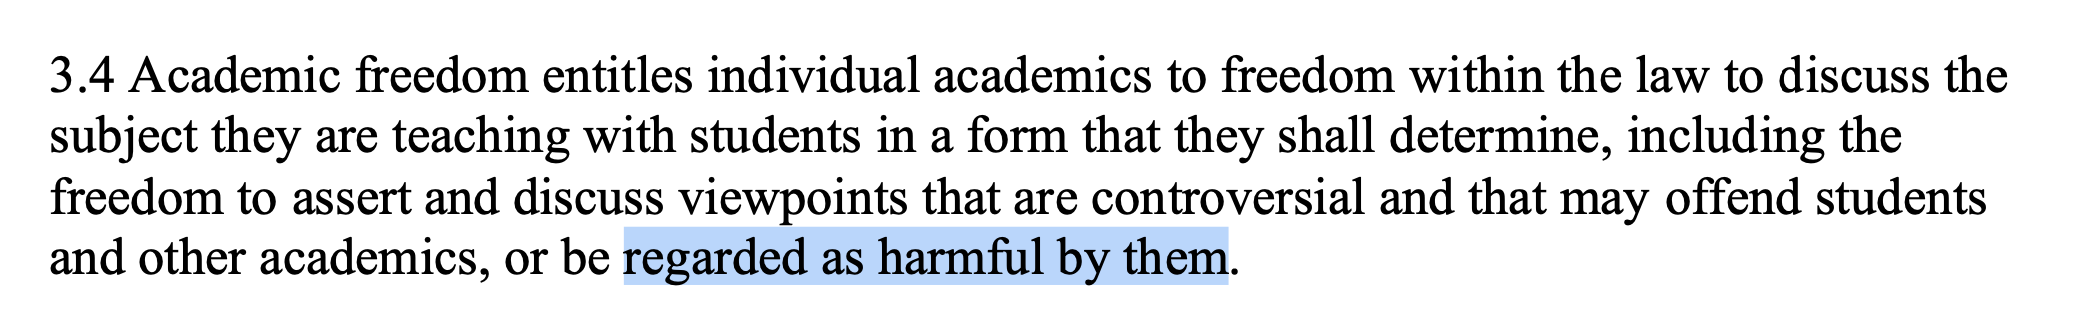 3.4 Academic freedom entitles individual academics to freedom within the law to discuss the subject they are teaching with students in a form that they shall determine, including the freedom to assert and discuss viewpoints that are controversial and that may offend students and other academics, or be regarded as harmful by them.